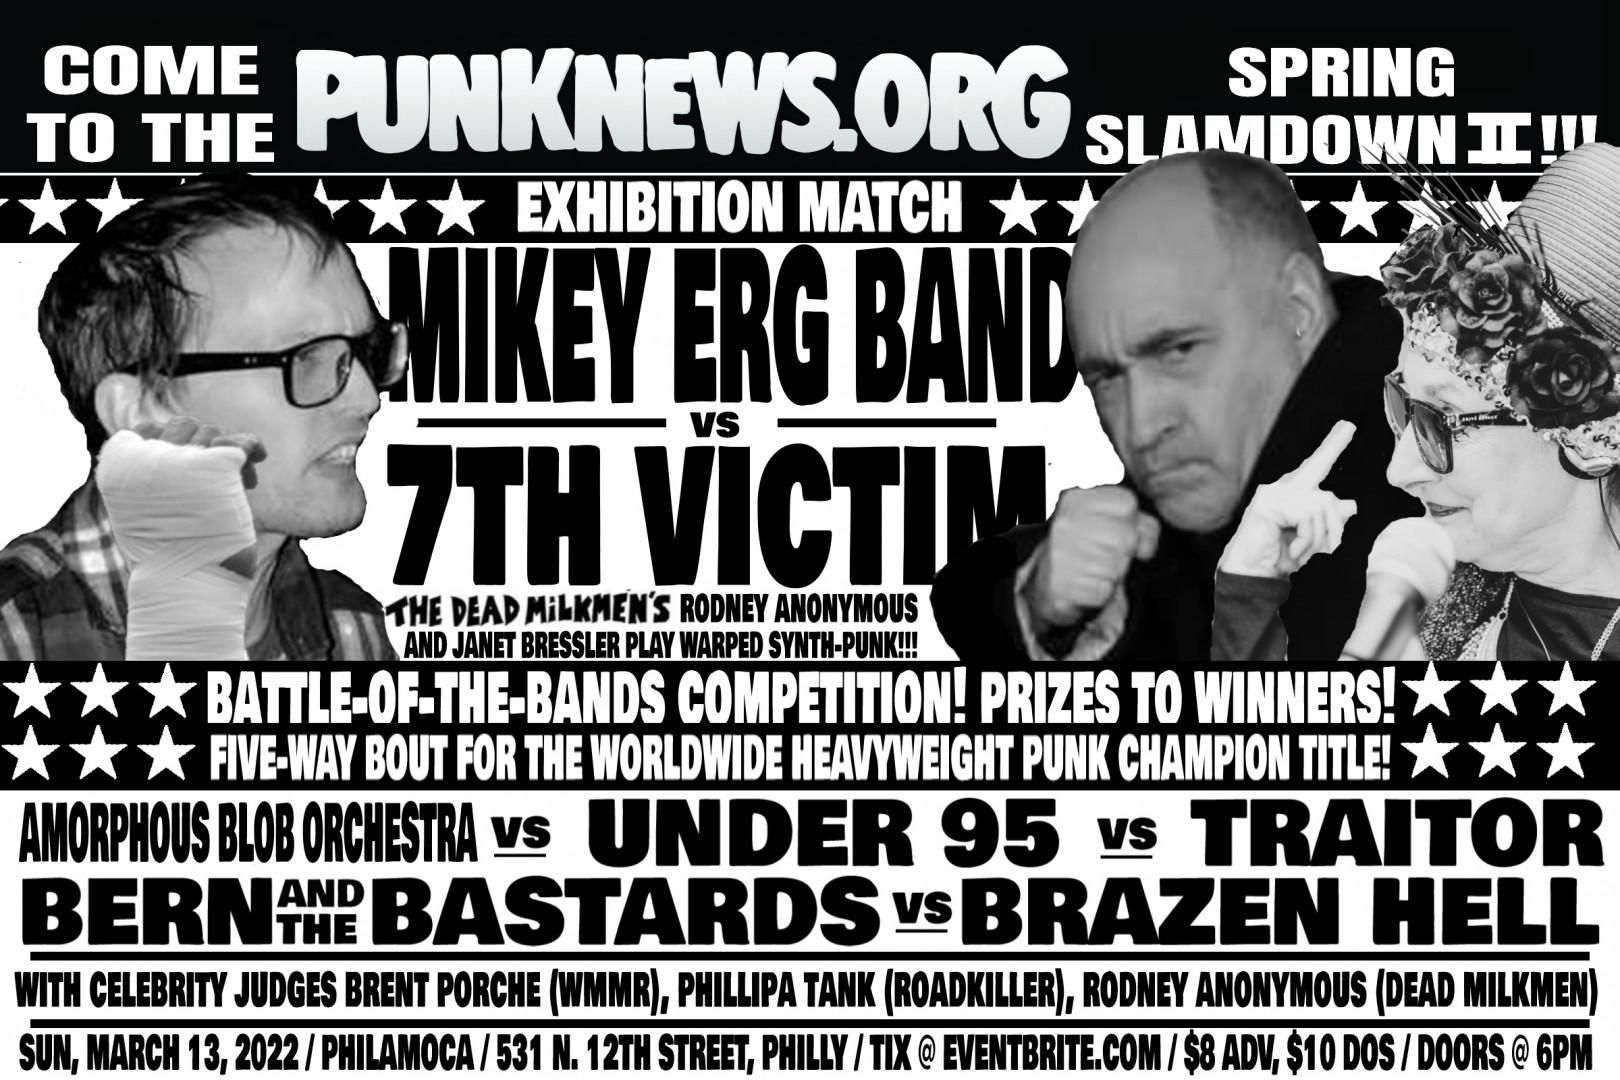 Mikey Erg Band and Rodney Anonymous' 7th Victim to headline Spring Slamdown 2 in Philly on March 13!